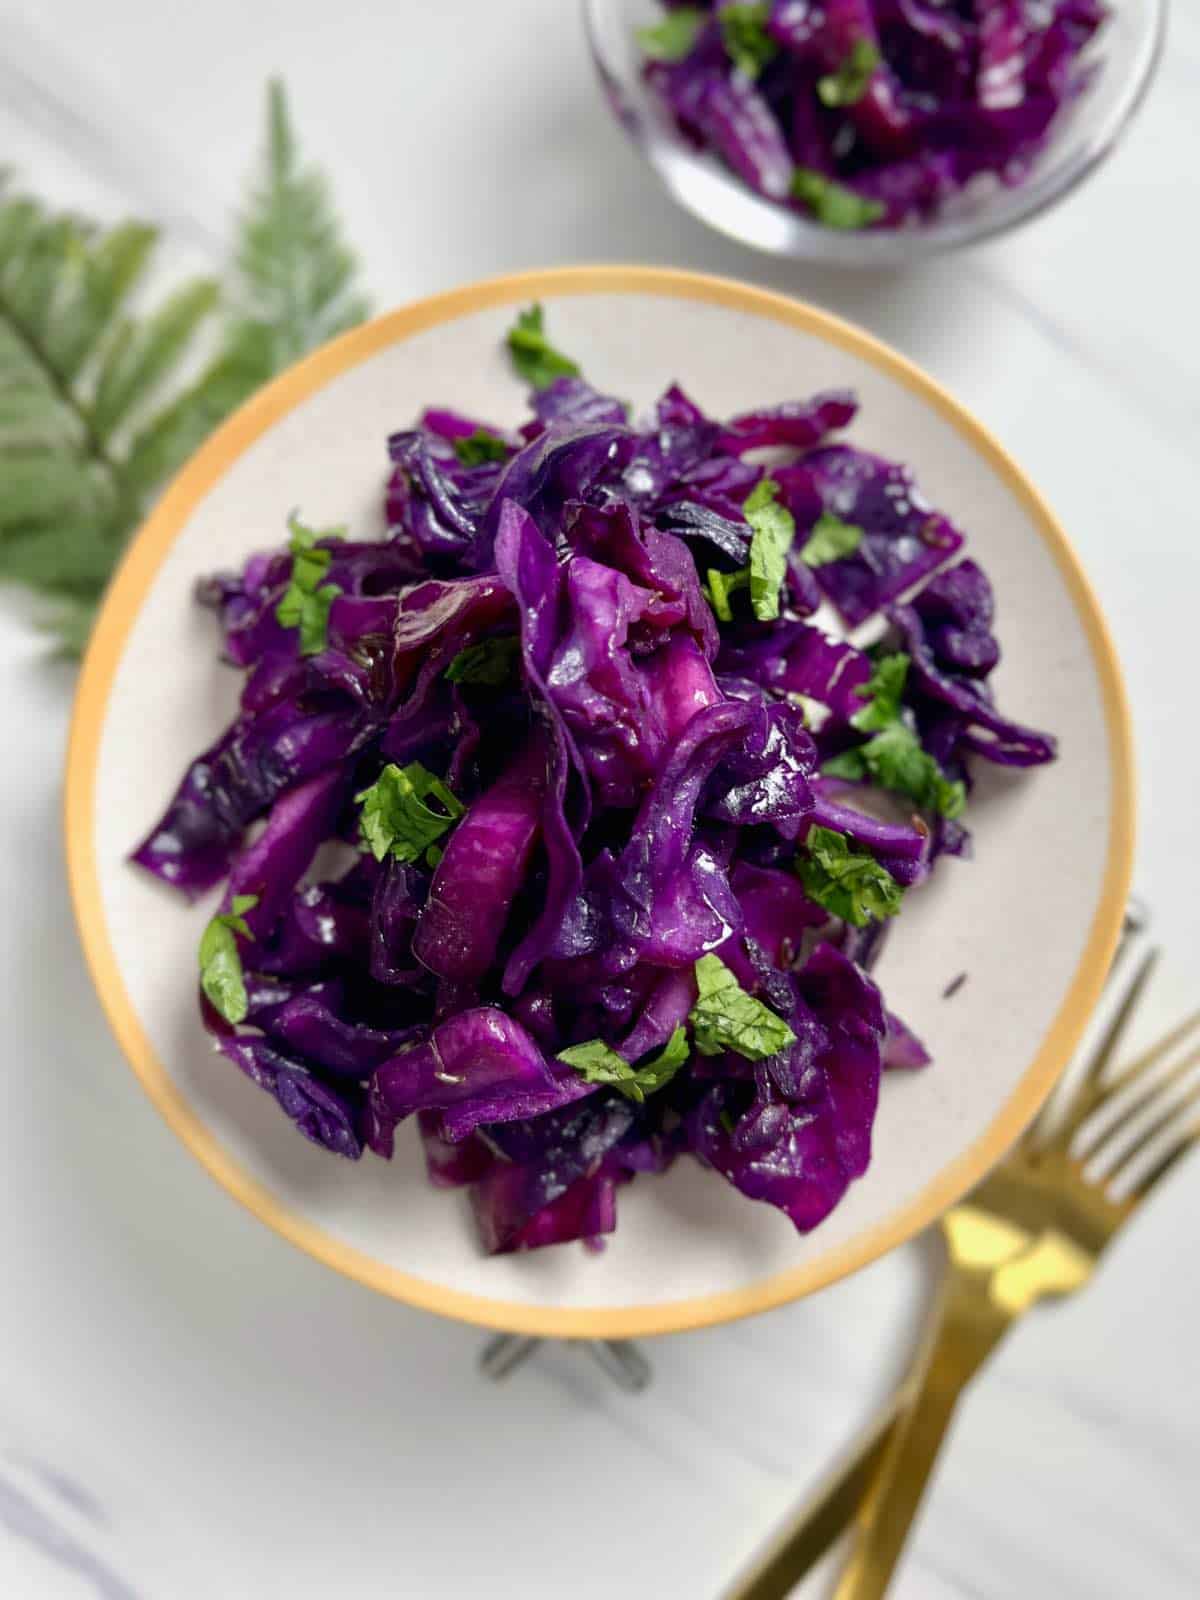 steamed purple cabbage served on a plate